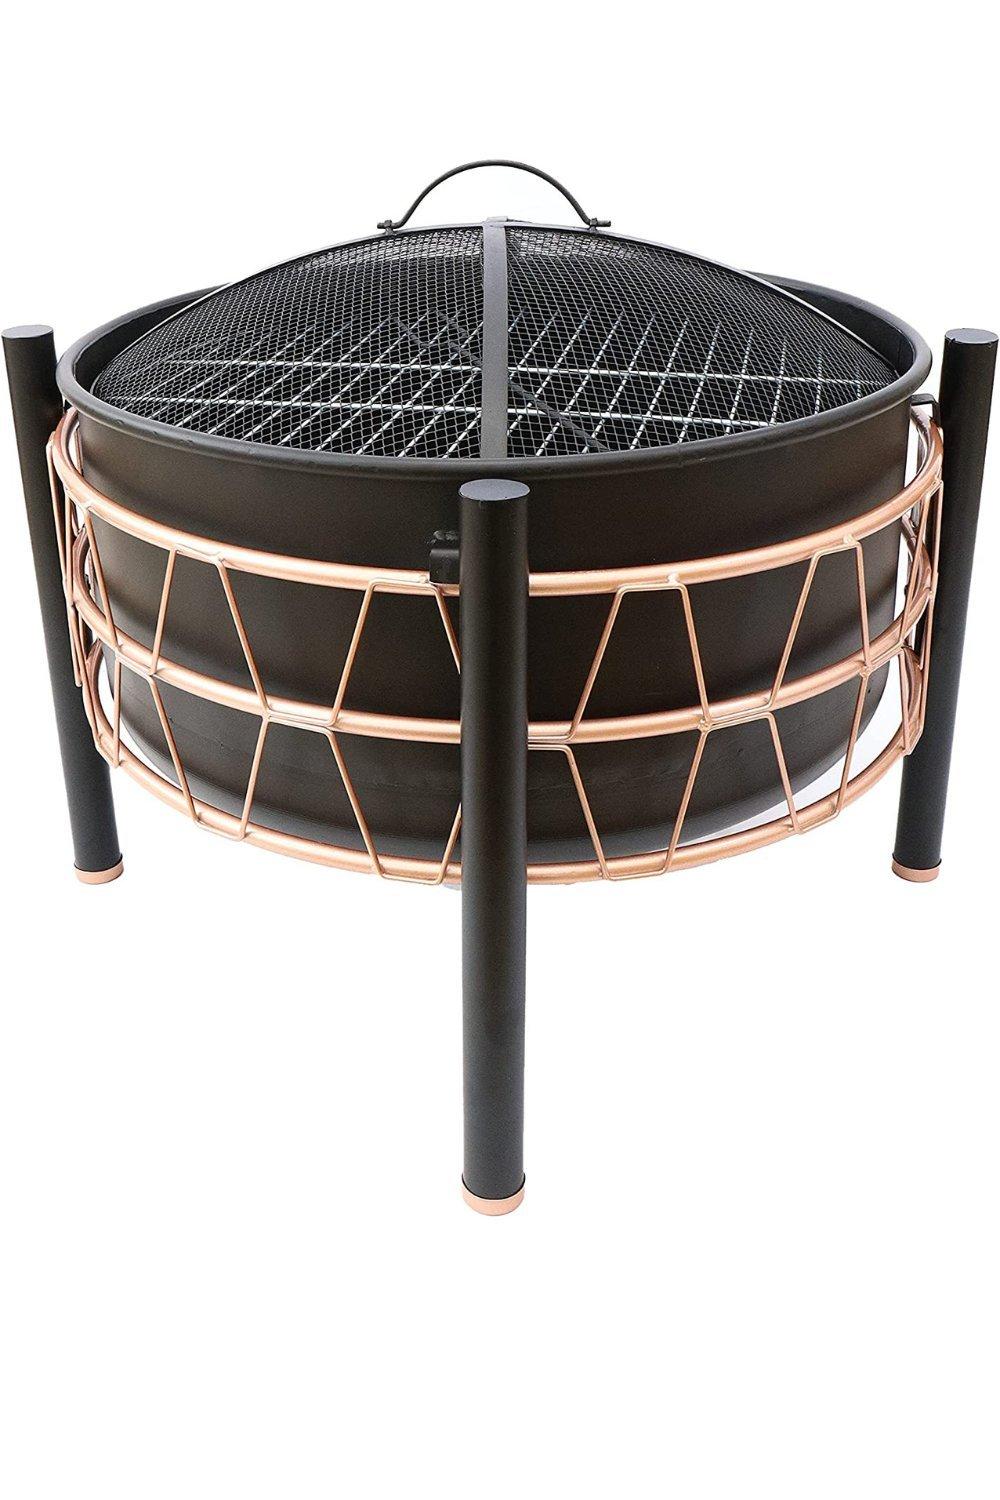 Garden Outdoor Black & Copper Large Bowl Fire Pit with Safety Mesh, Cooking BBQ Grill and Long Poker